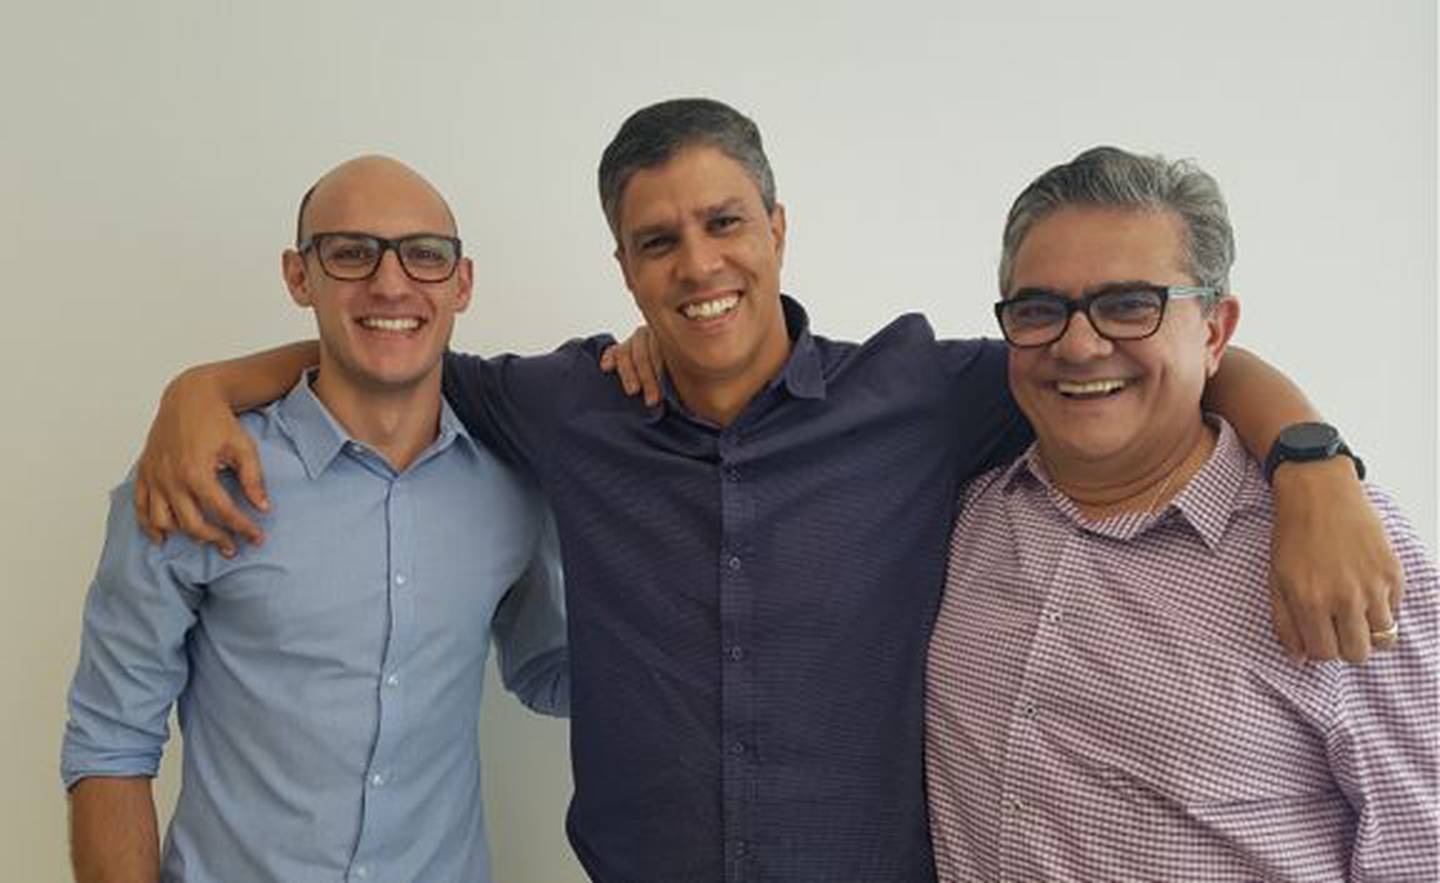 Marcelo Guarnieri, Ricardo Araujo, and Celso Queiroz - co-founders of Kangu which was acquired this week by Mercado Libre